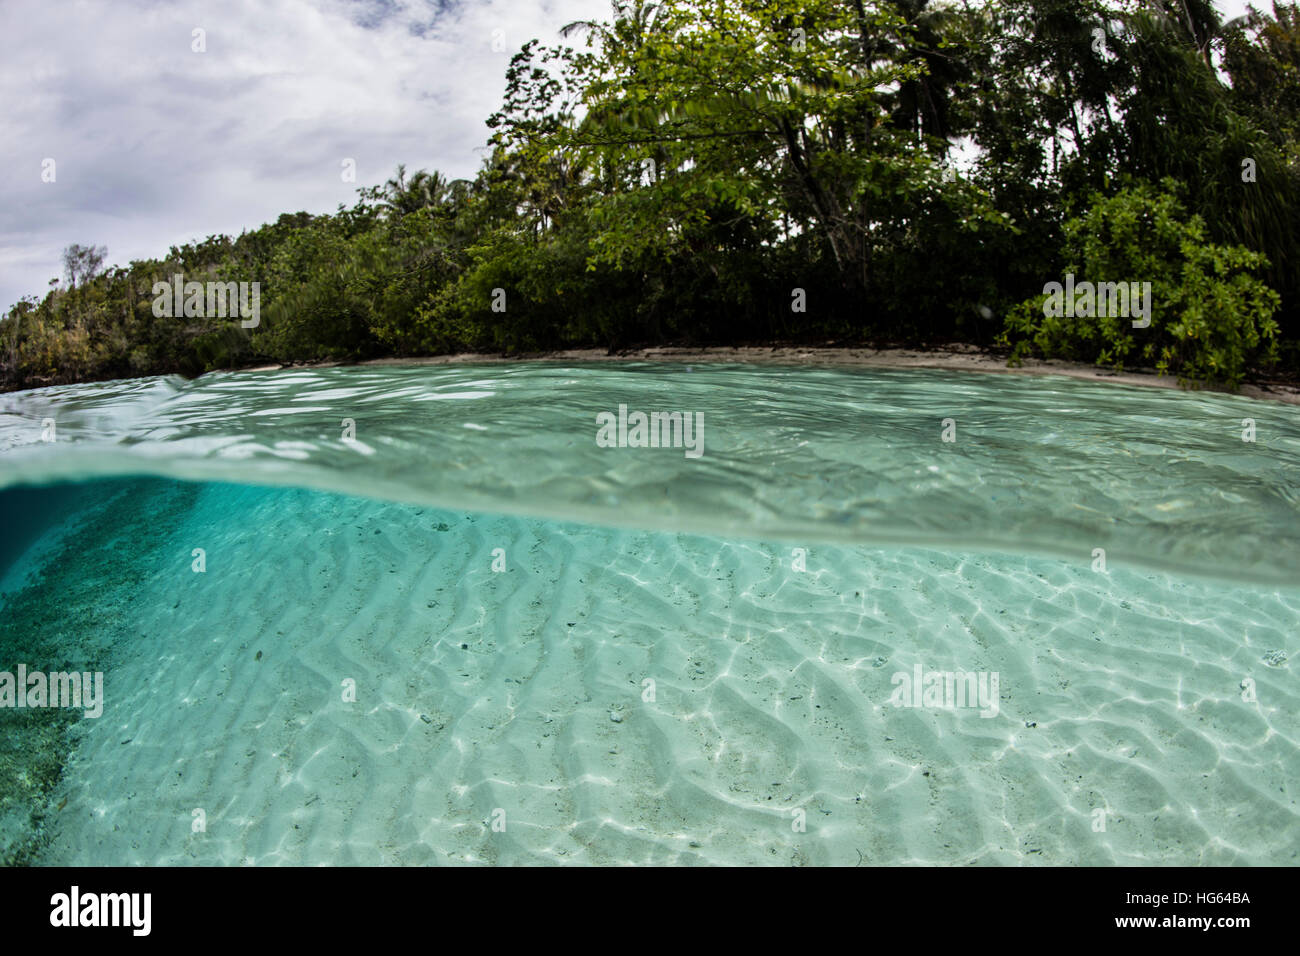 Clear water bathes a tropical island in Raja Ampat, Indonesia. Stock Photo